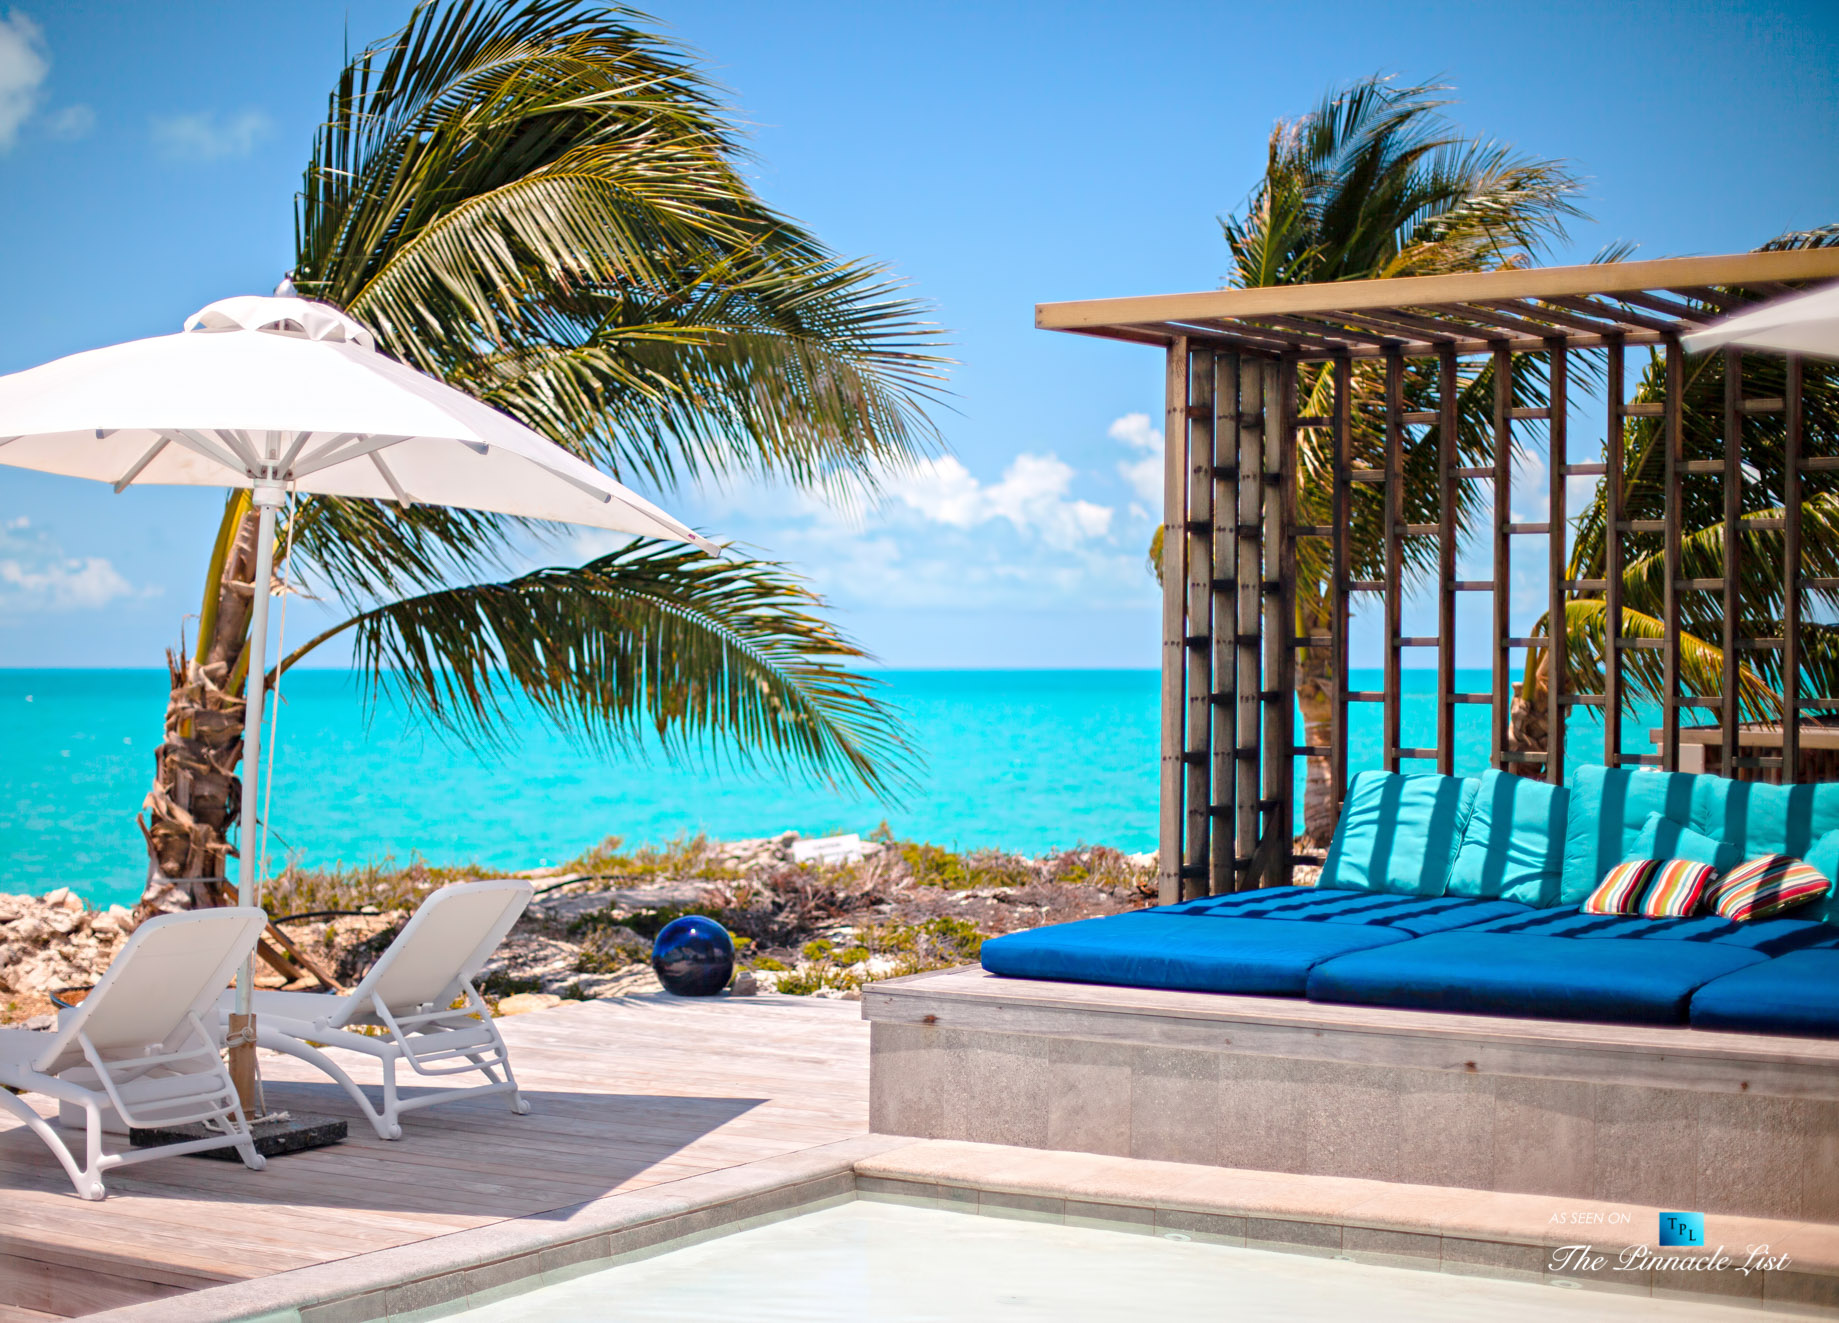 Tip of the Tail Villa - Providenciales, Turks and Caicos Islands - Caribbean Villa Infinity Pool Chairs - Luxury Real Estate - South Shore Peninsula Home